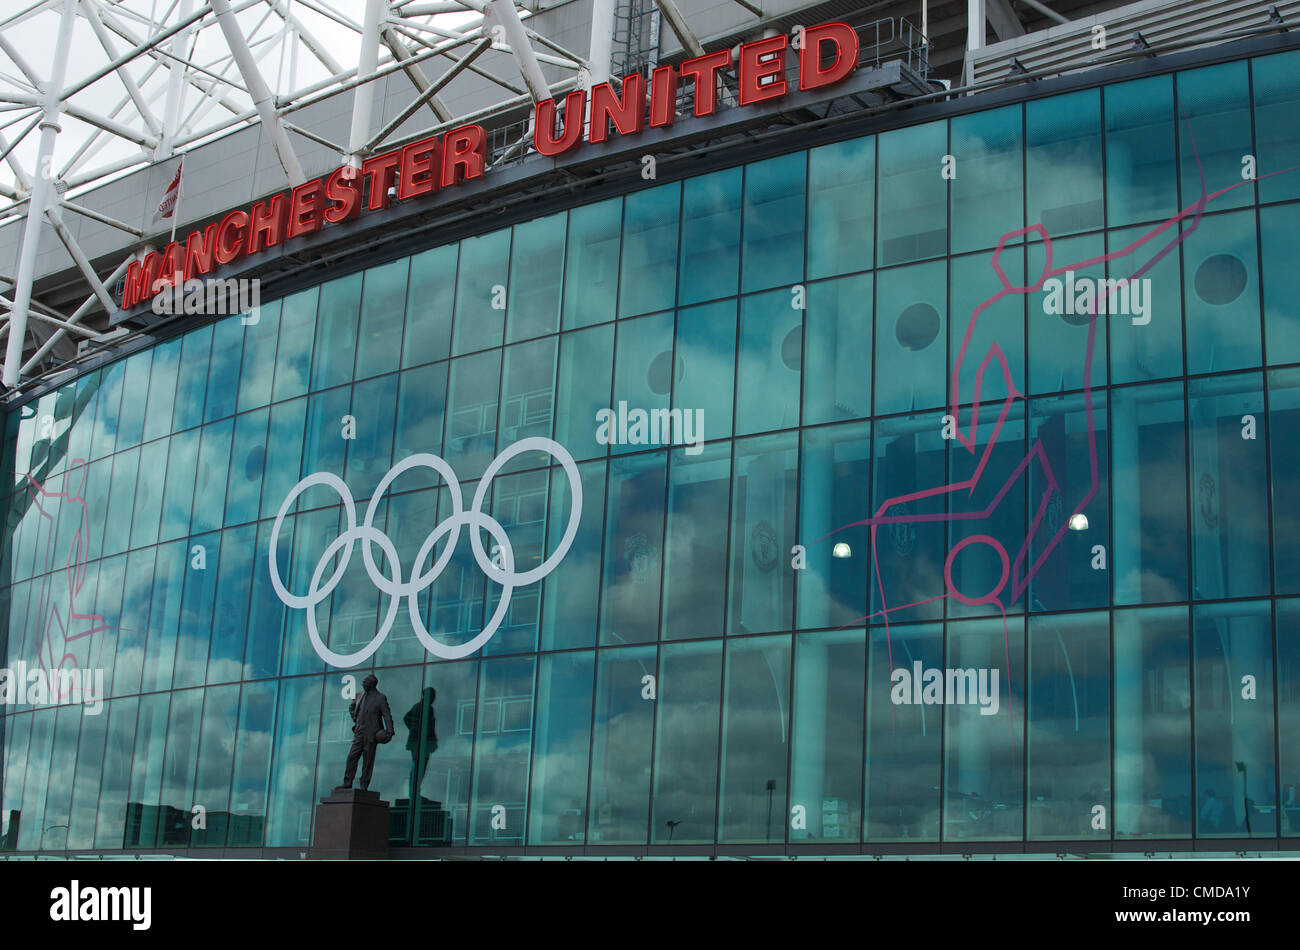 Manchester United's ground, Old Trafford, has the London Olympic rings above the statue of Sir Matt Busby, former manager, in readiness for its first matches on 25/07/2012 between the Inited Arab Emirates and Uruguay, followed by Great Britain against Senegal. Stock Photo